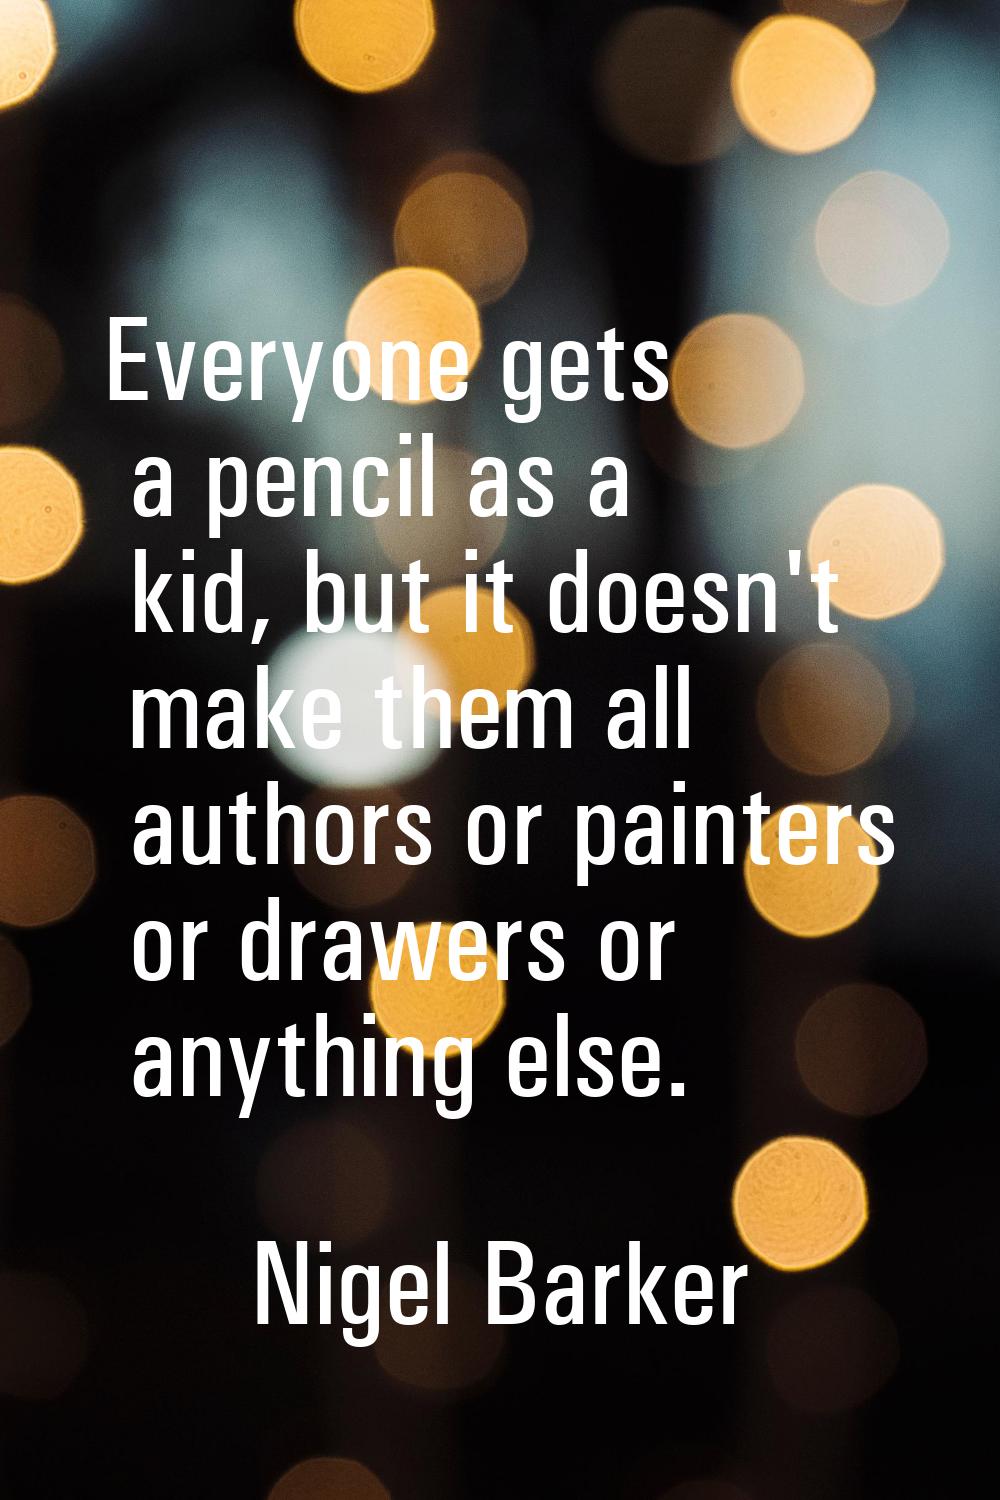 Everyone gets a pencil as a kid, but it doesn't make them all authors or painters or drawers or any